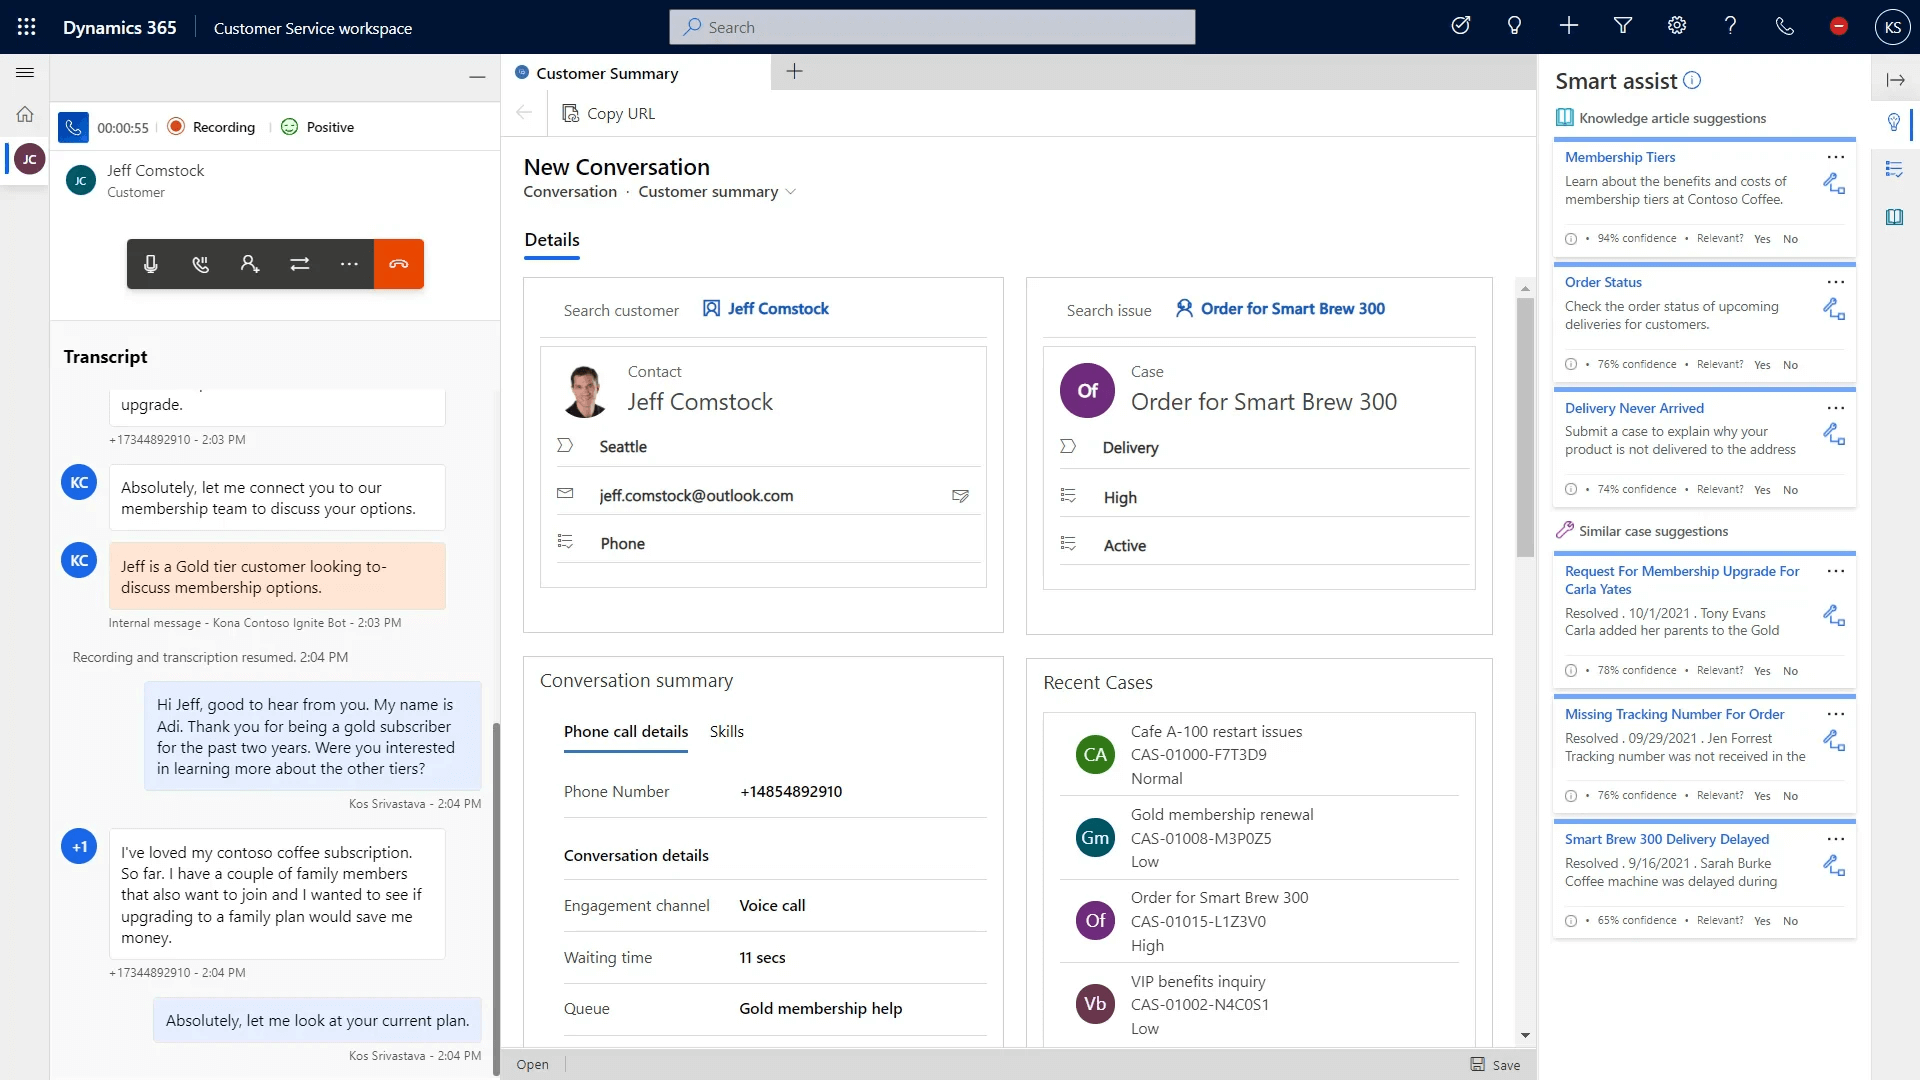 Microsoft Dynamics 365 - Best for AI-Powered Relationship Management